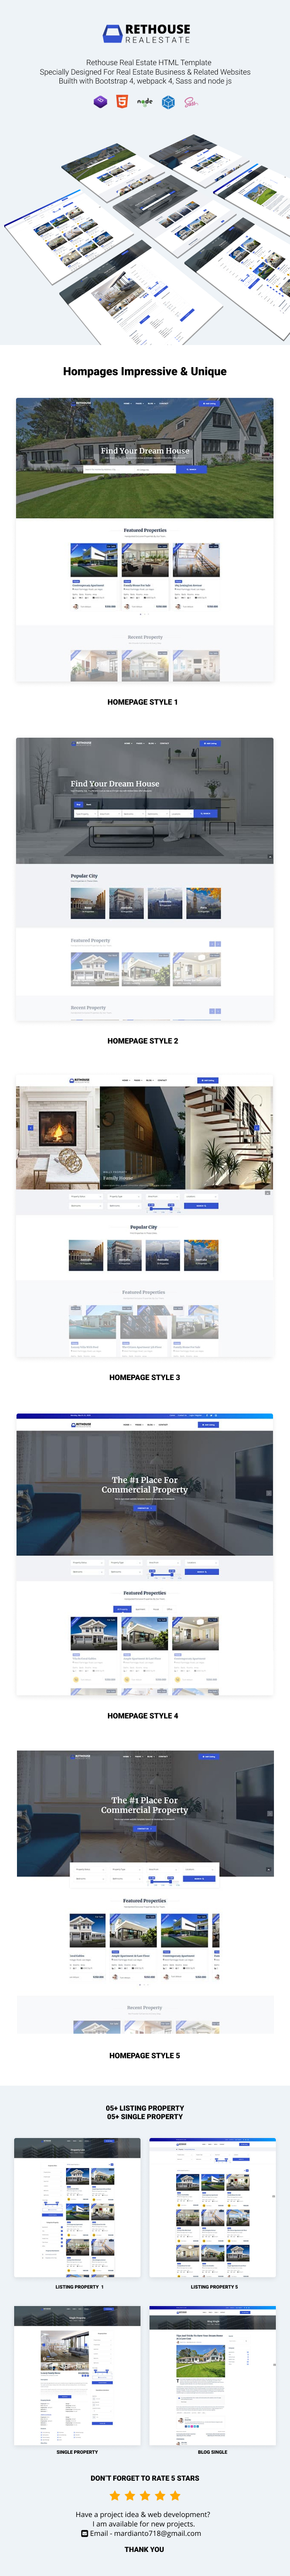  Rethouse - Real Estate Html template